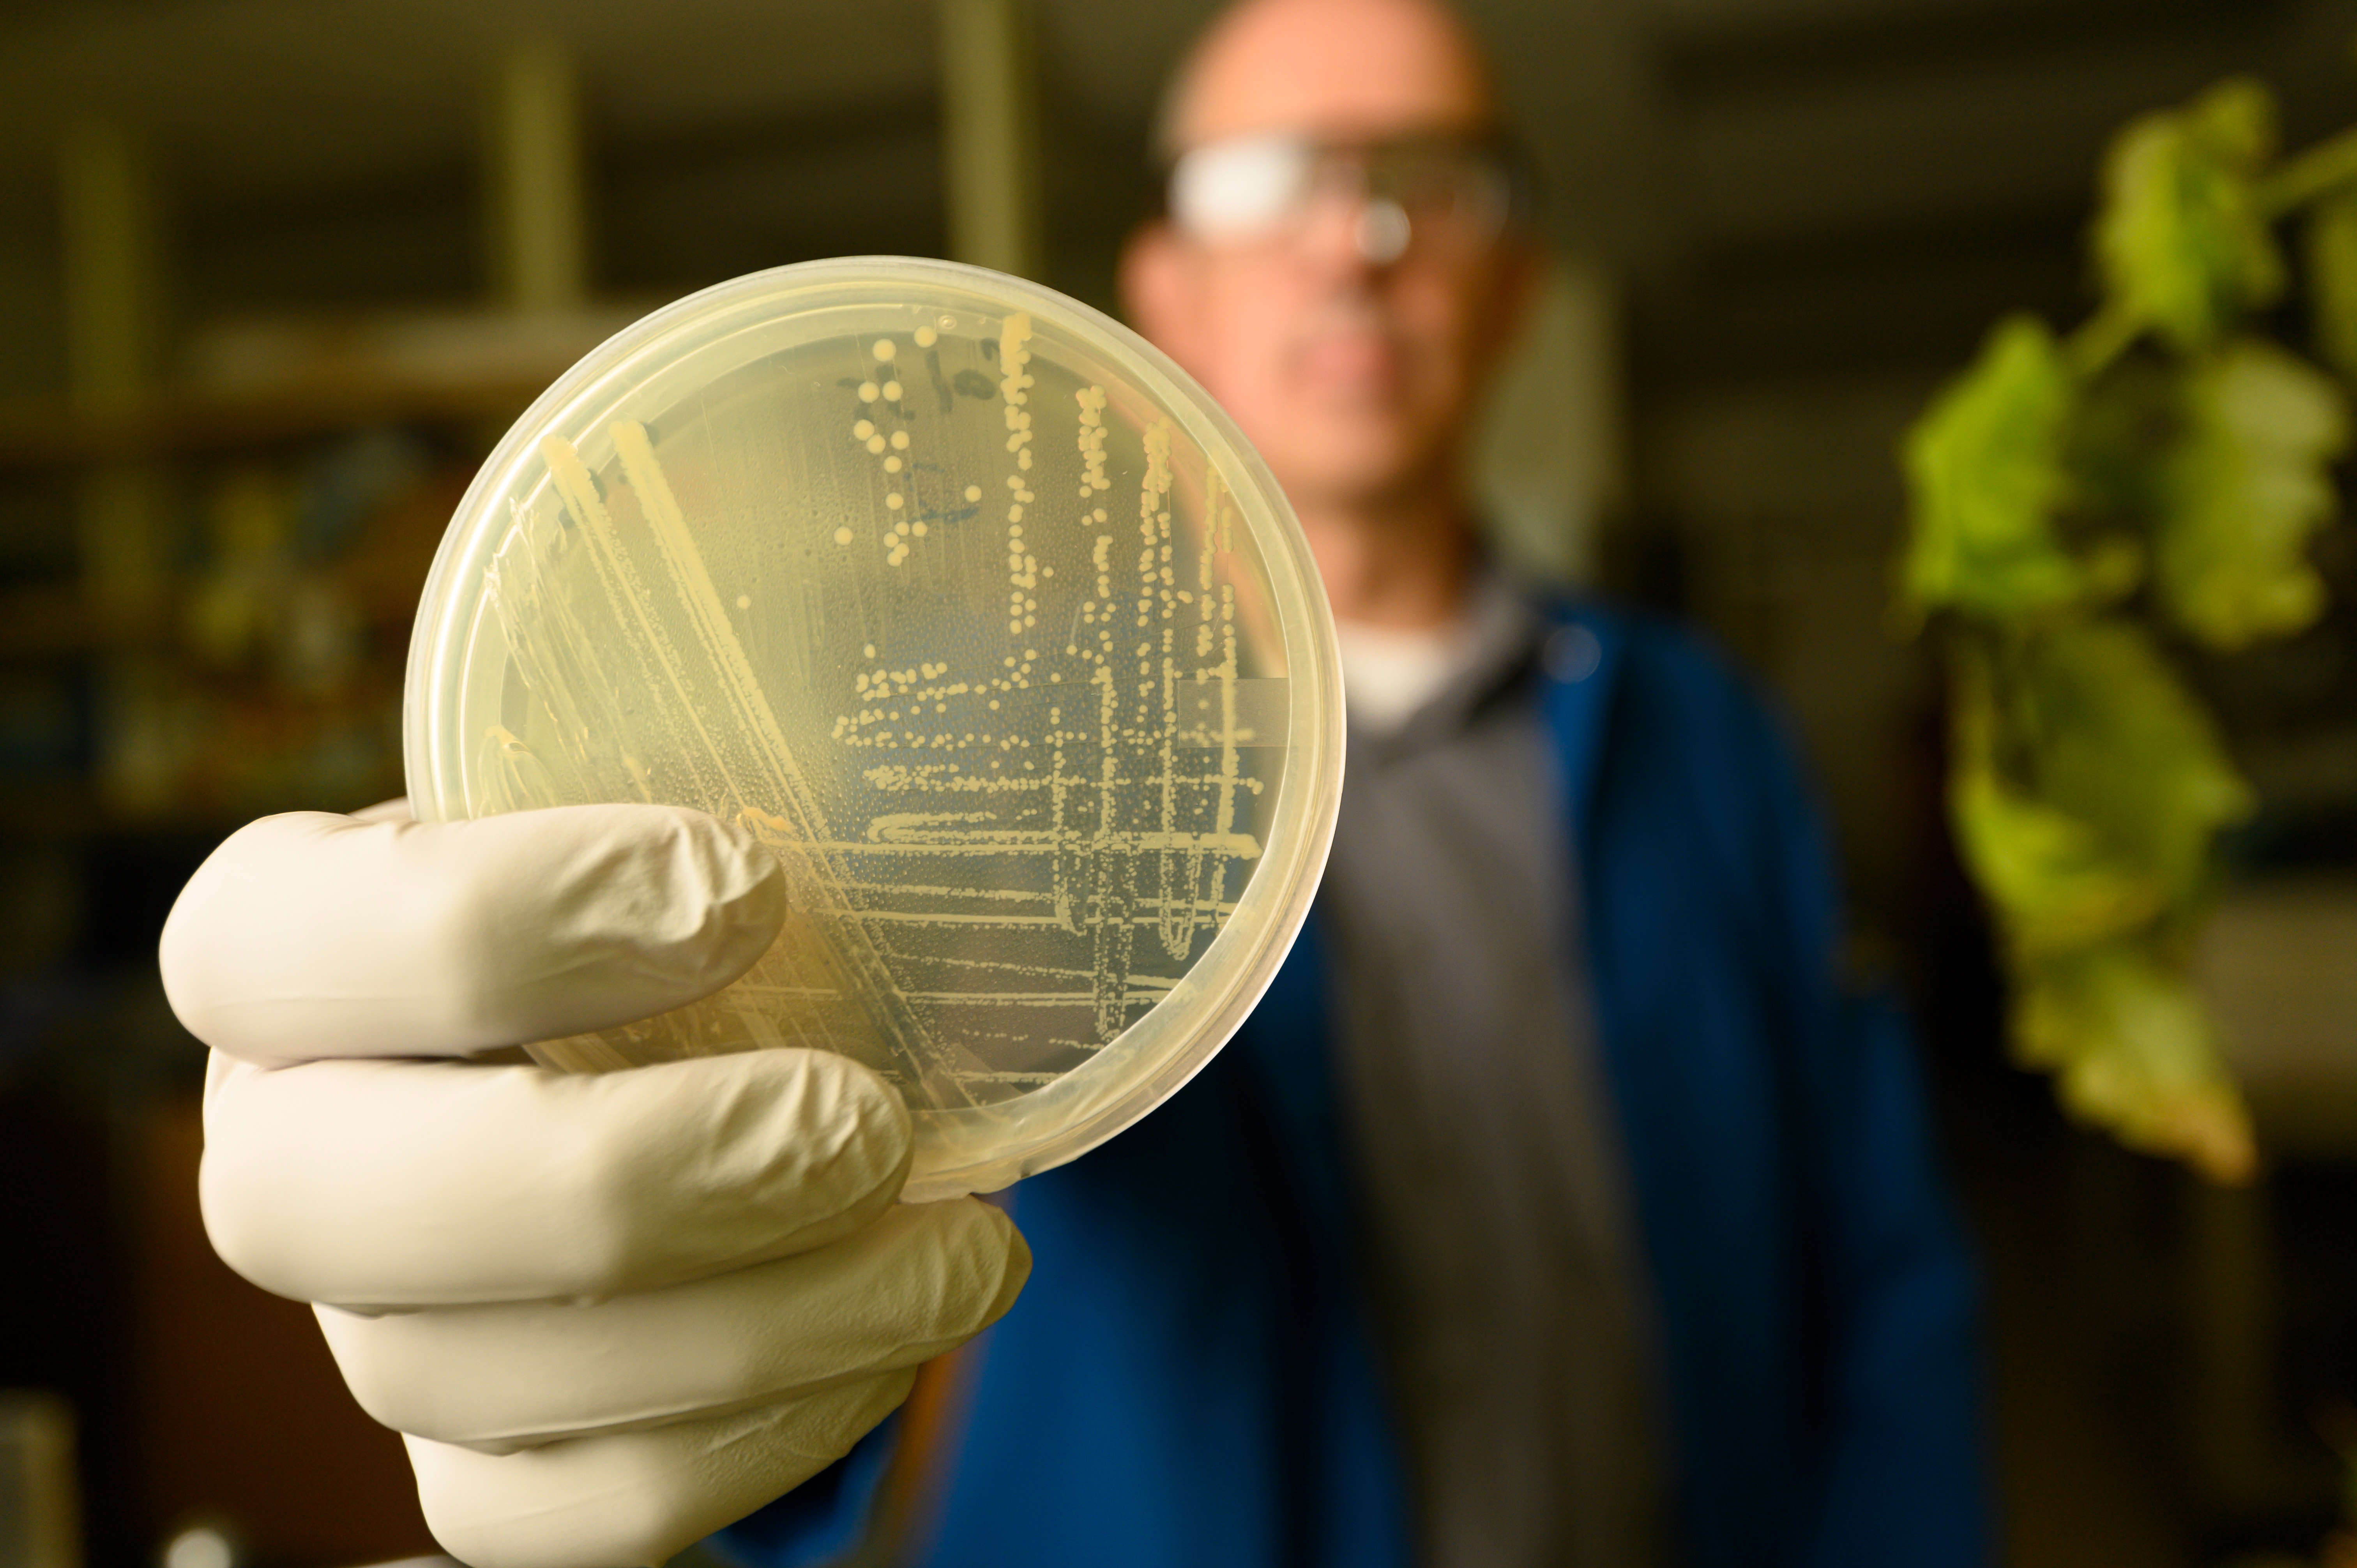 The discovery of a promising antifungal microbe in a state park led to new legislation that creates a way for researchers to commercialize scientific discoveries.